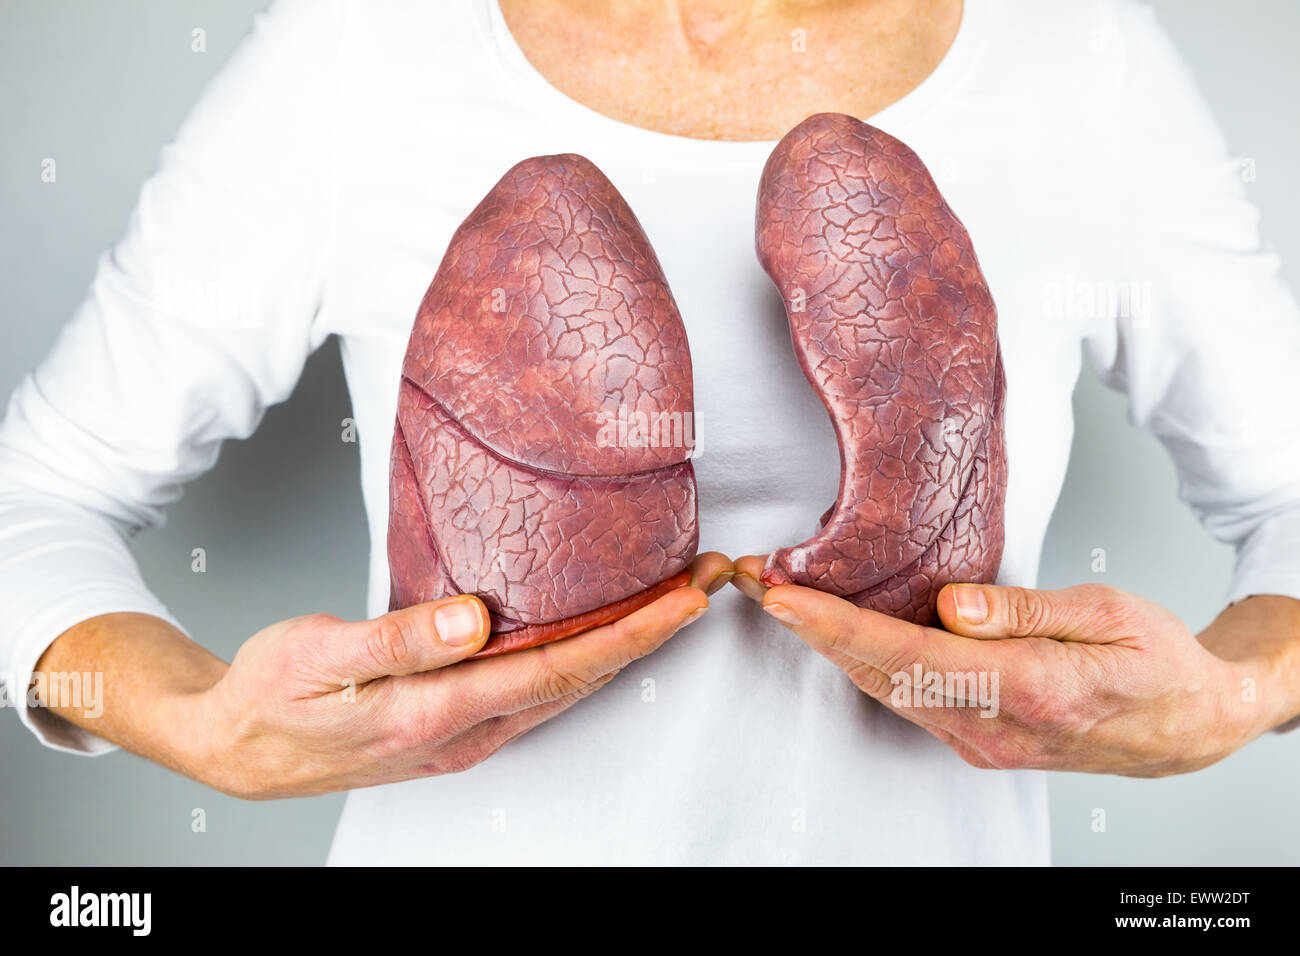 Woman showing models of two lungs in front of chest to symbolize breathing for education Stock Photo